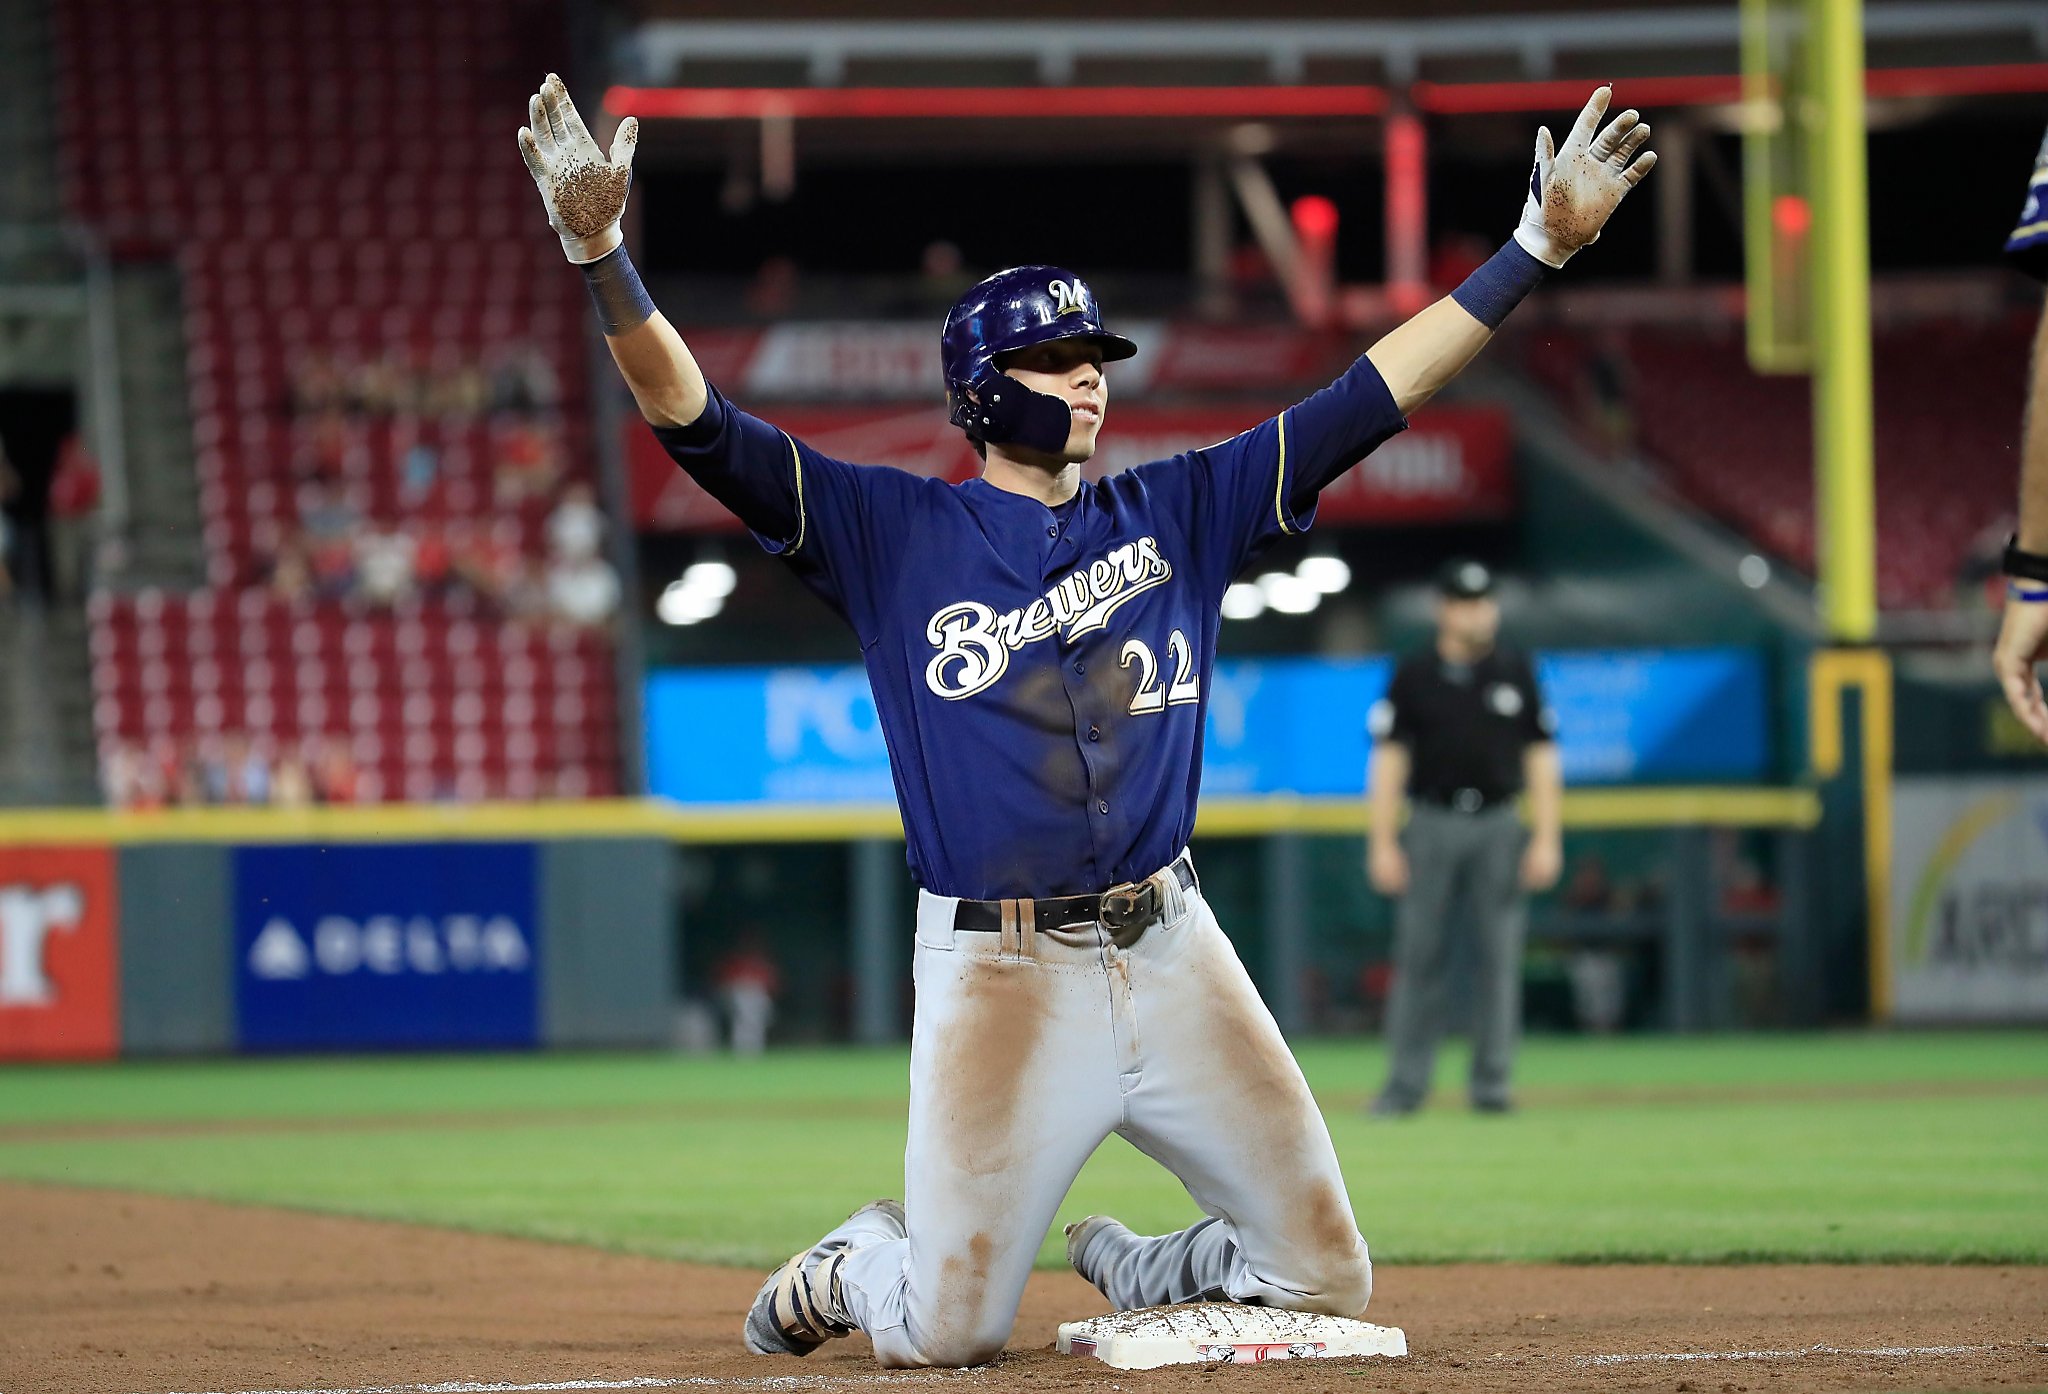 Christian Yelich hits for the cycle as Brewers edge past Reds.